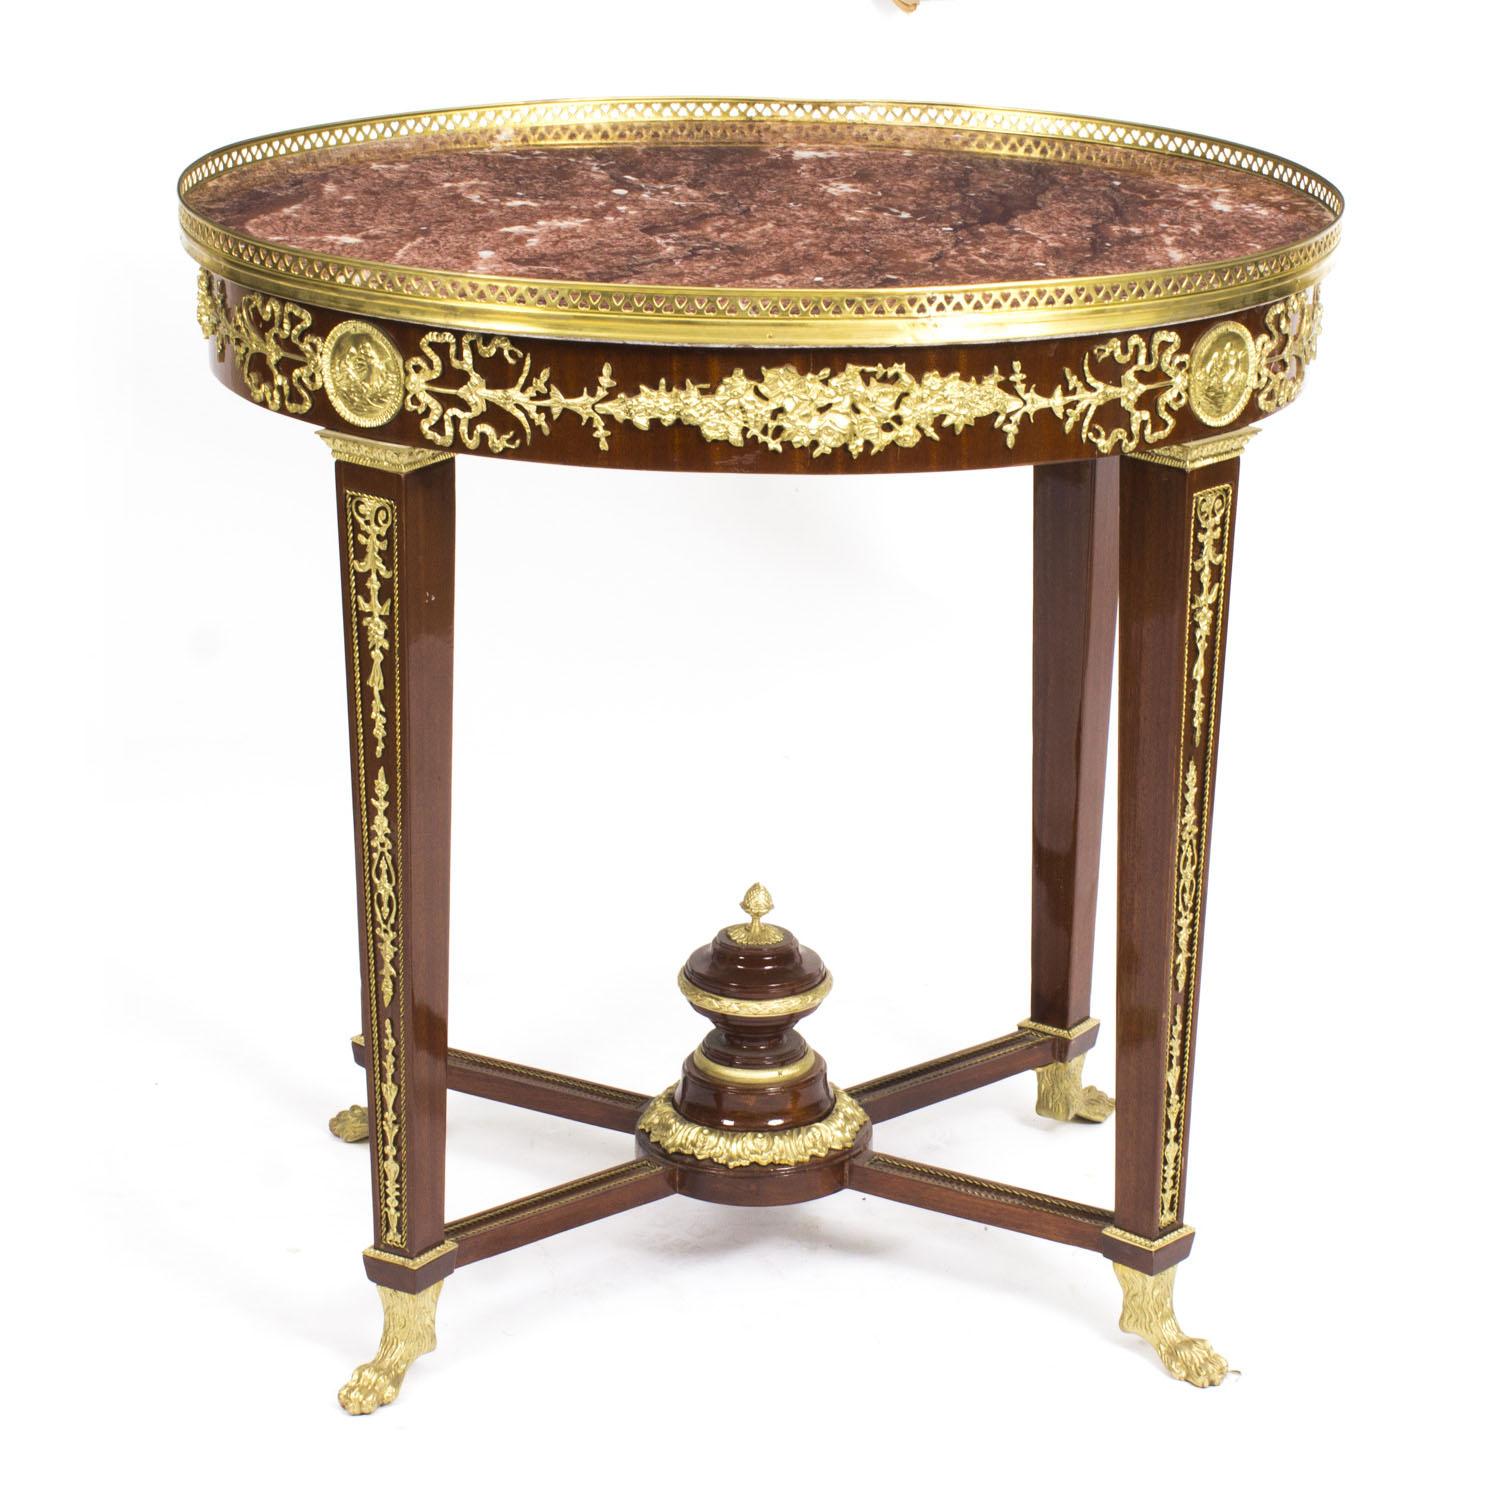 This is a handsome Vintage Empire Revival occasional table with fabulous ormolu decoration typical of the Empire period and a 